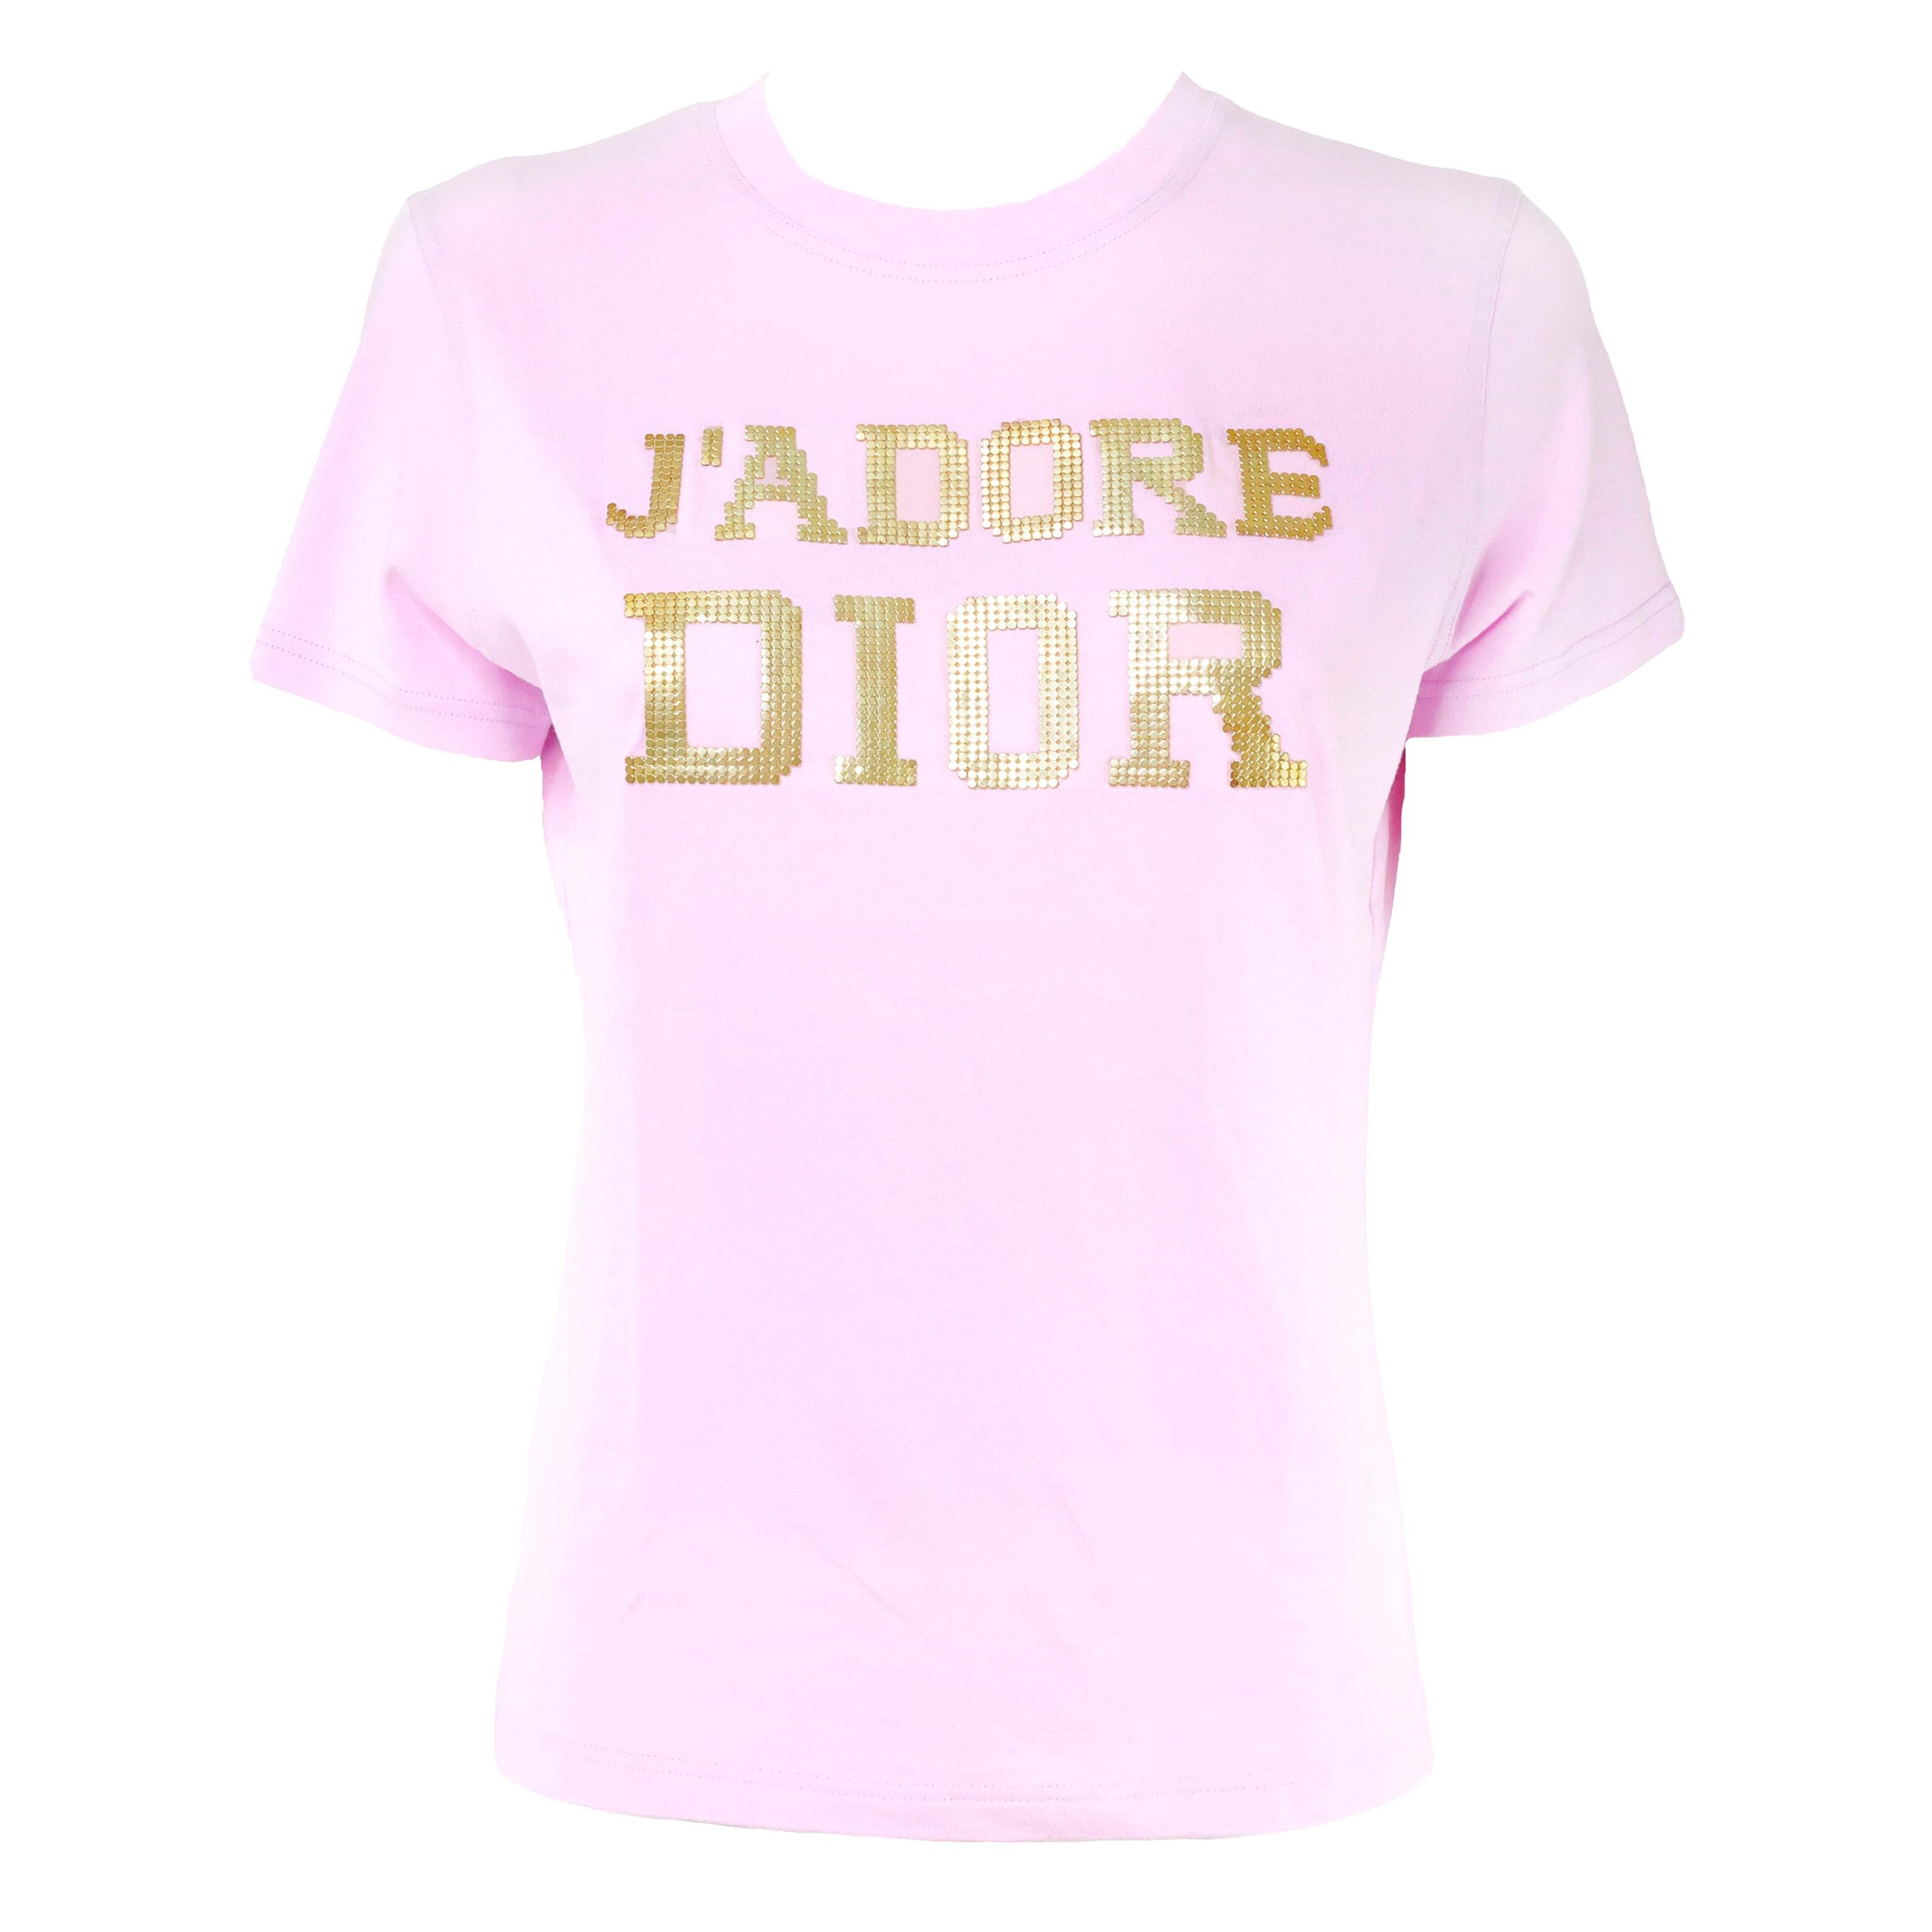 Christian Dior by John Galliano J'adore Dior, The Latest Blonde T-shirt For Sale